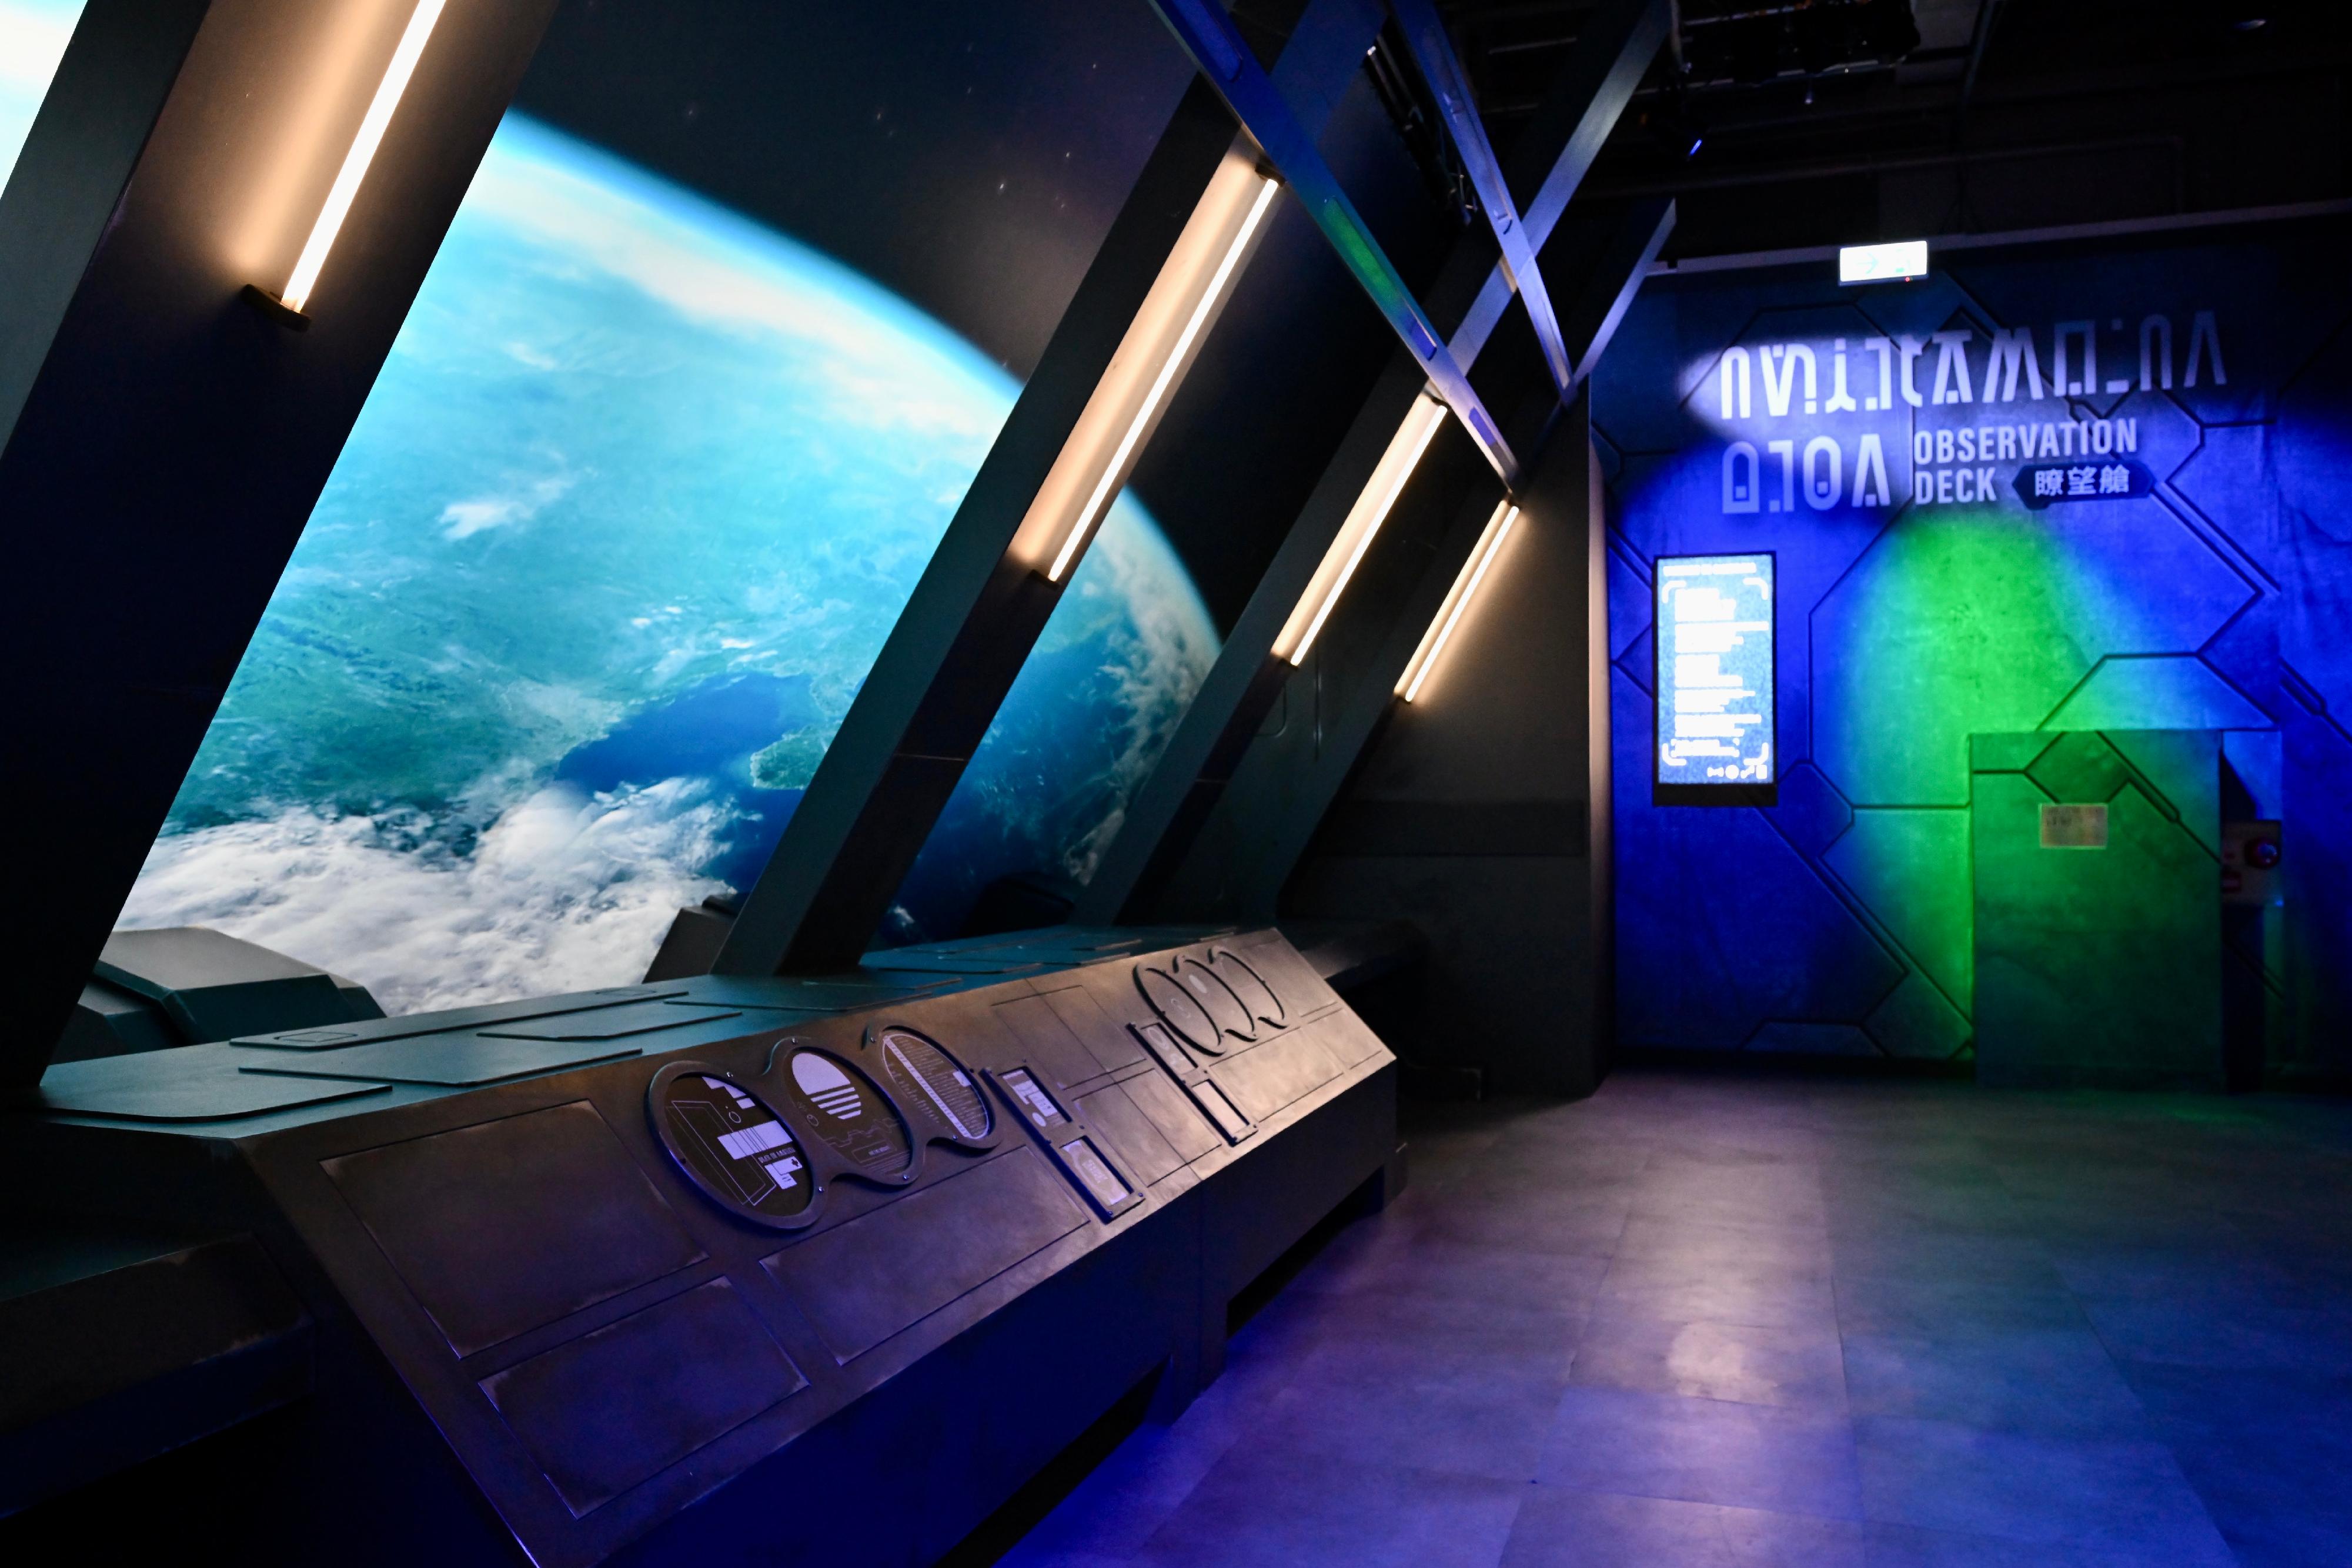 The Hong Kong Science Museum will launch a new special exhibition, "Science Fiction: Voyage to the Edge of Imagination", tomorrow (December 15). Visitors can enjoy a simulated and stunning view of the Earth from space.